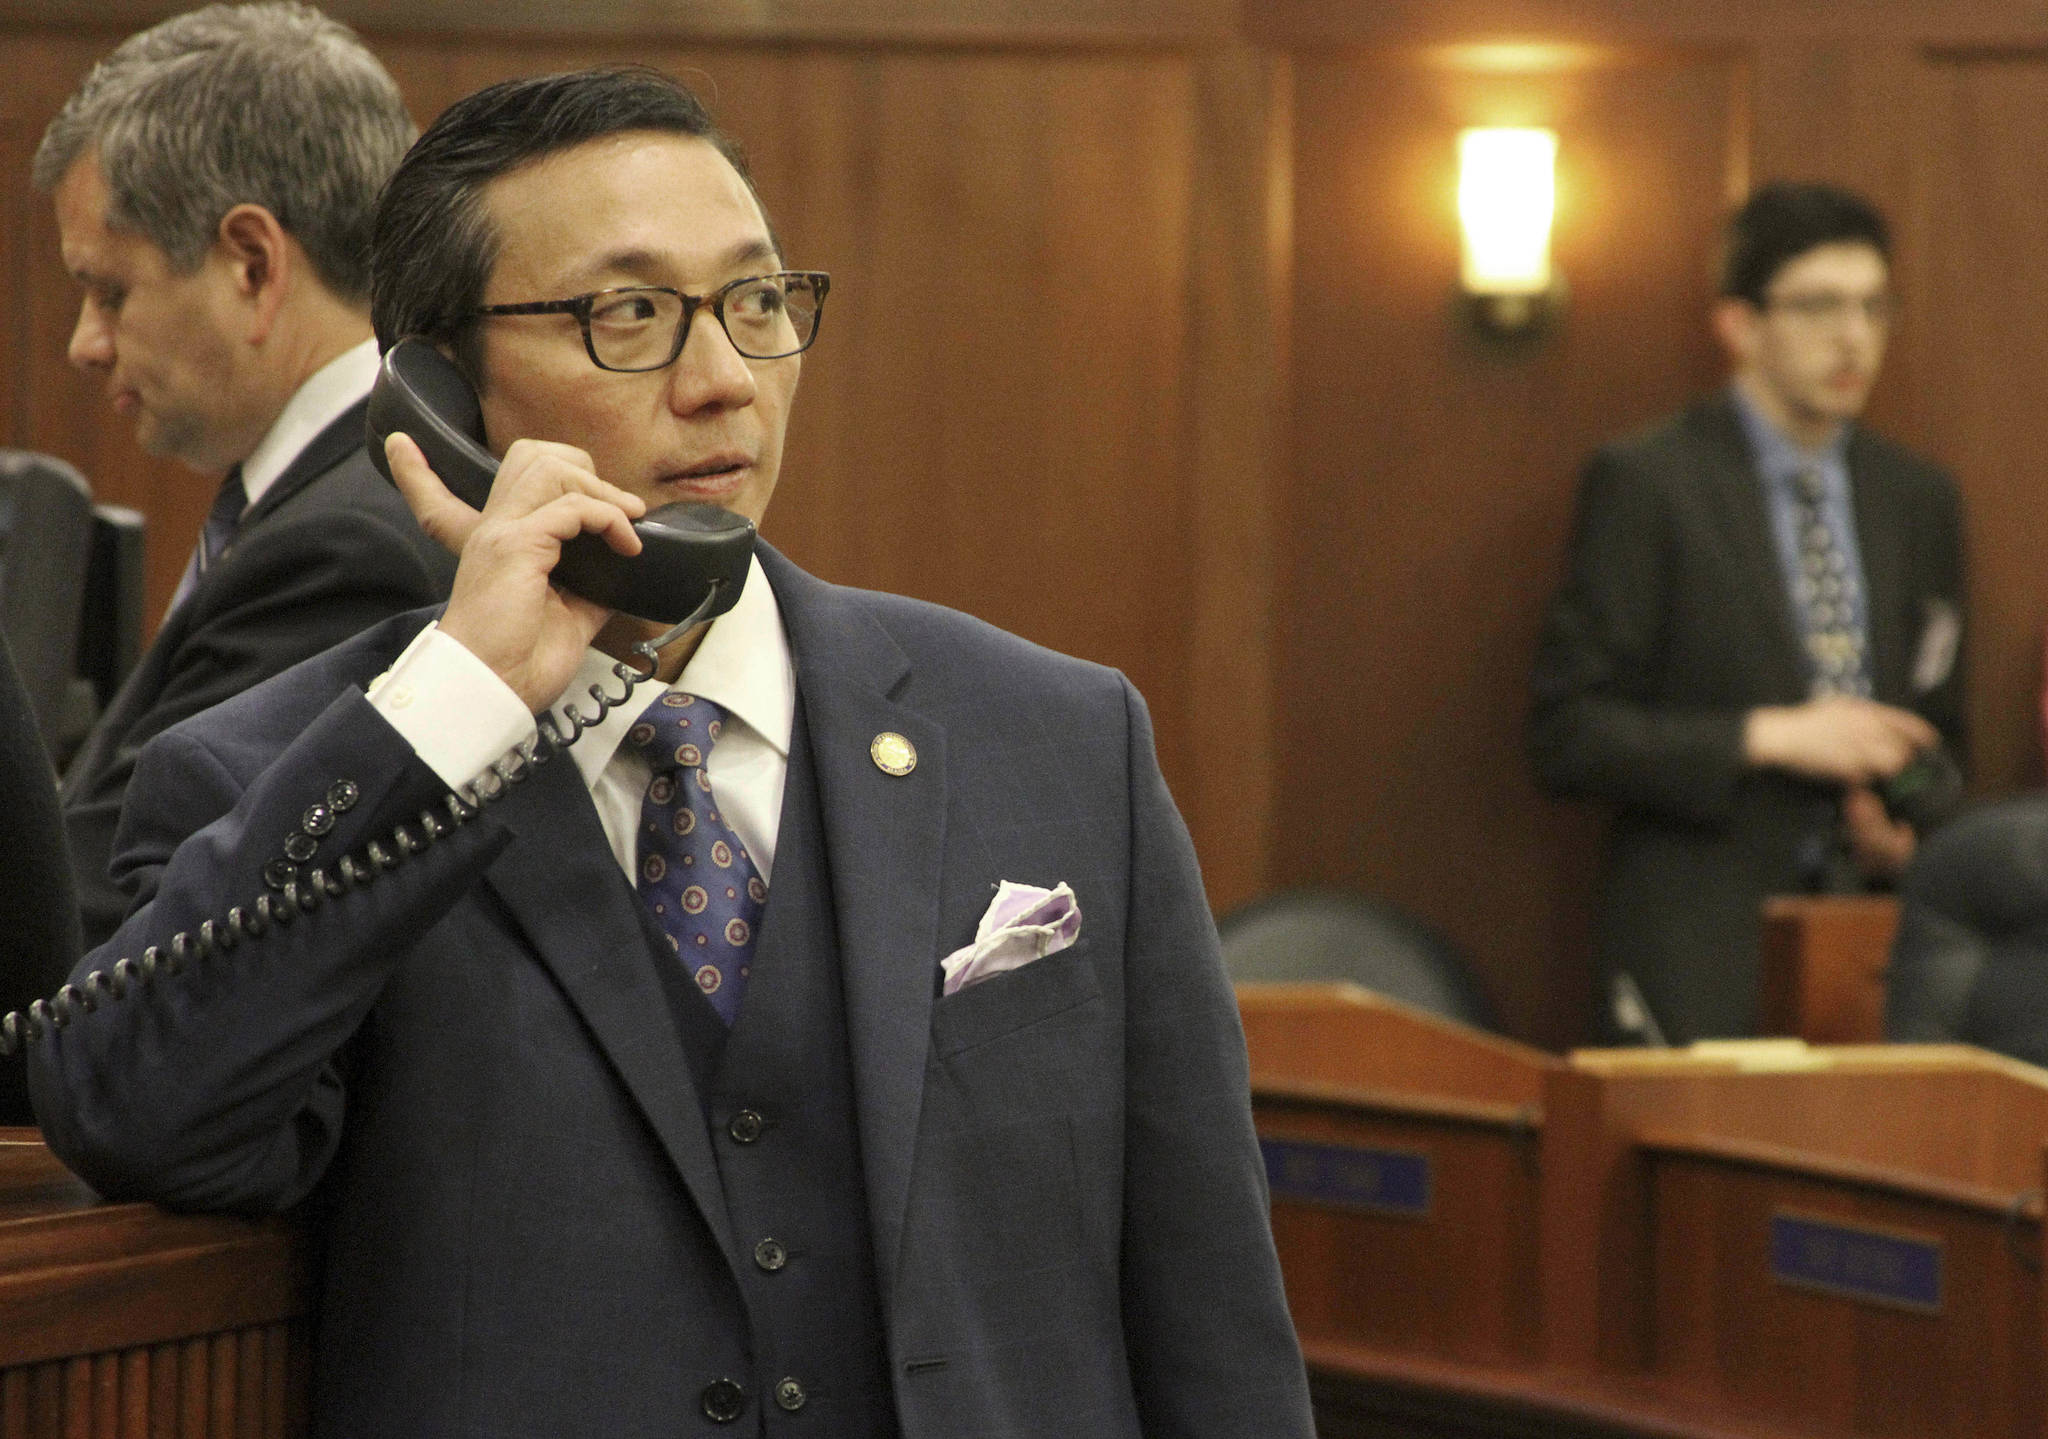 This Jan. 16 photo shows Alaska state Rep. Scott Kawasaki, a Fairbanks Democrat, talking on a telephone before the start of the legislative session at the state Capitol in Juneau. (AP Photo/Mark Thiessen, File)